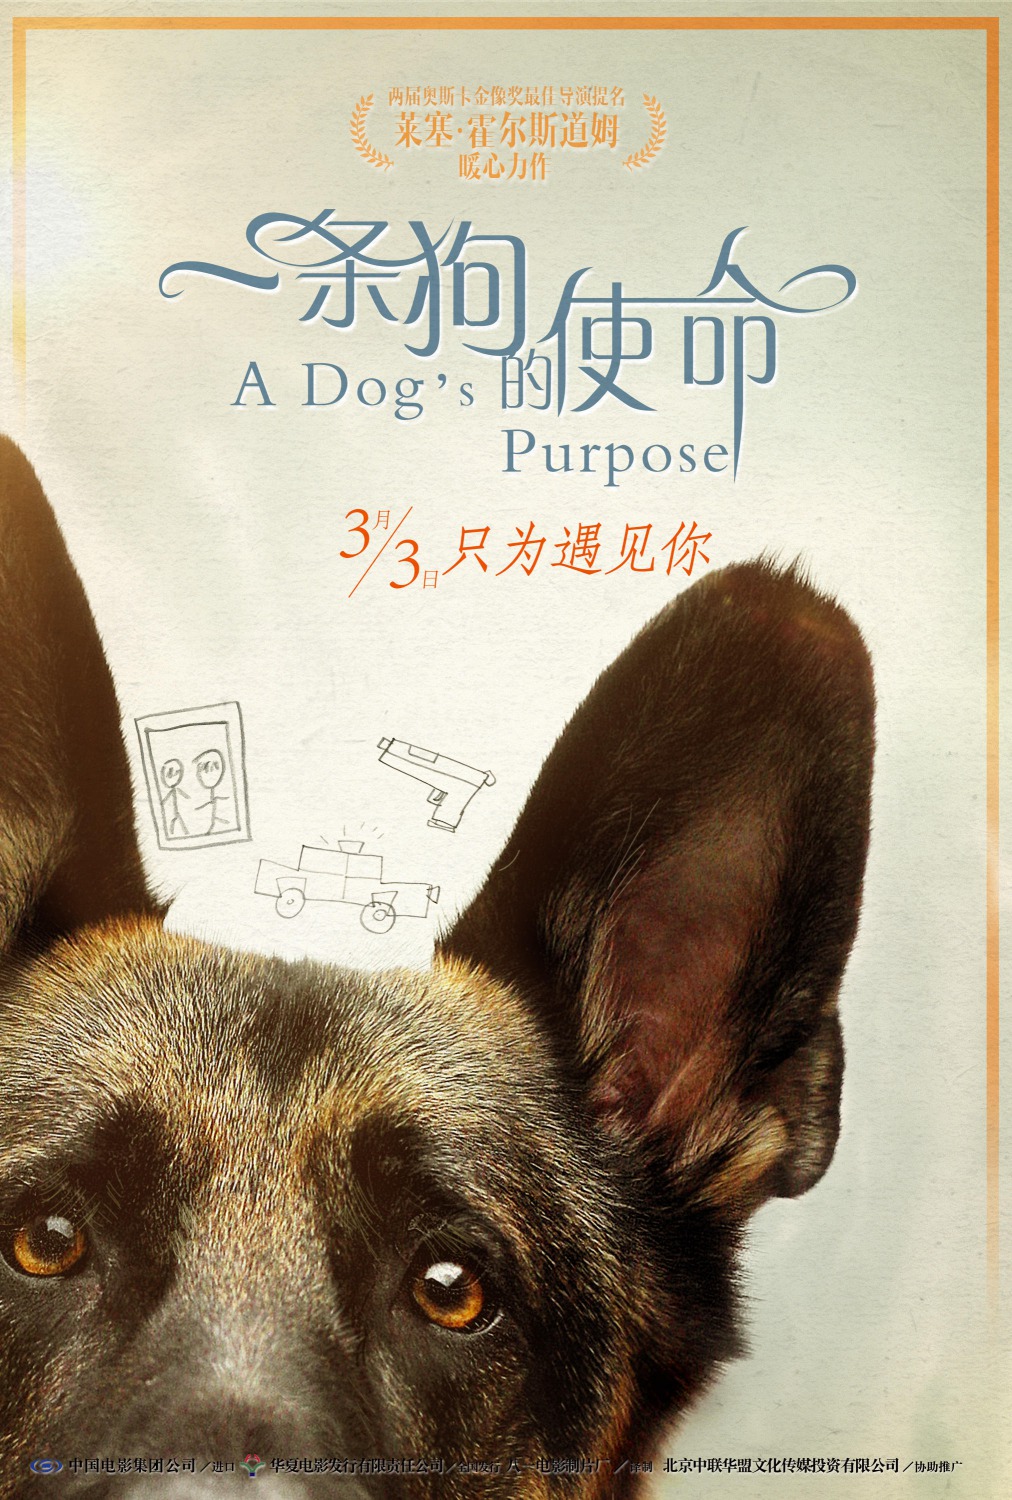 Extra Large Movie Poster Image for A Dog's Purpose (#7 of 13)